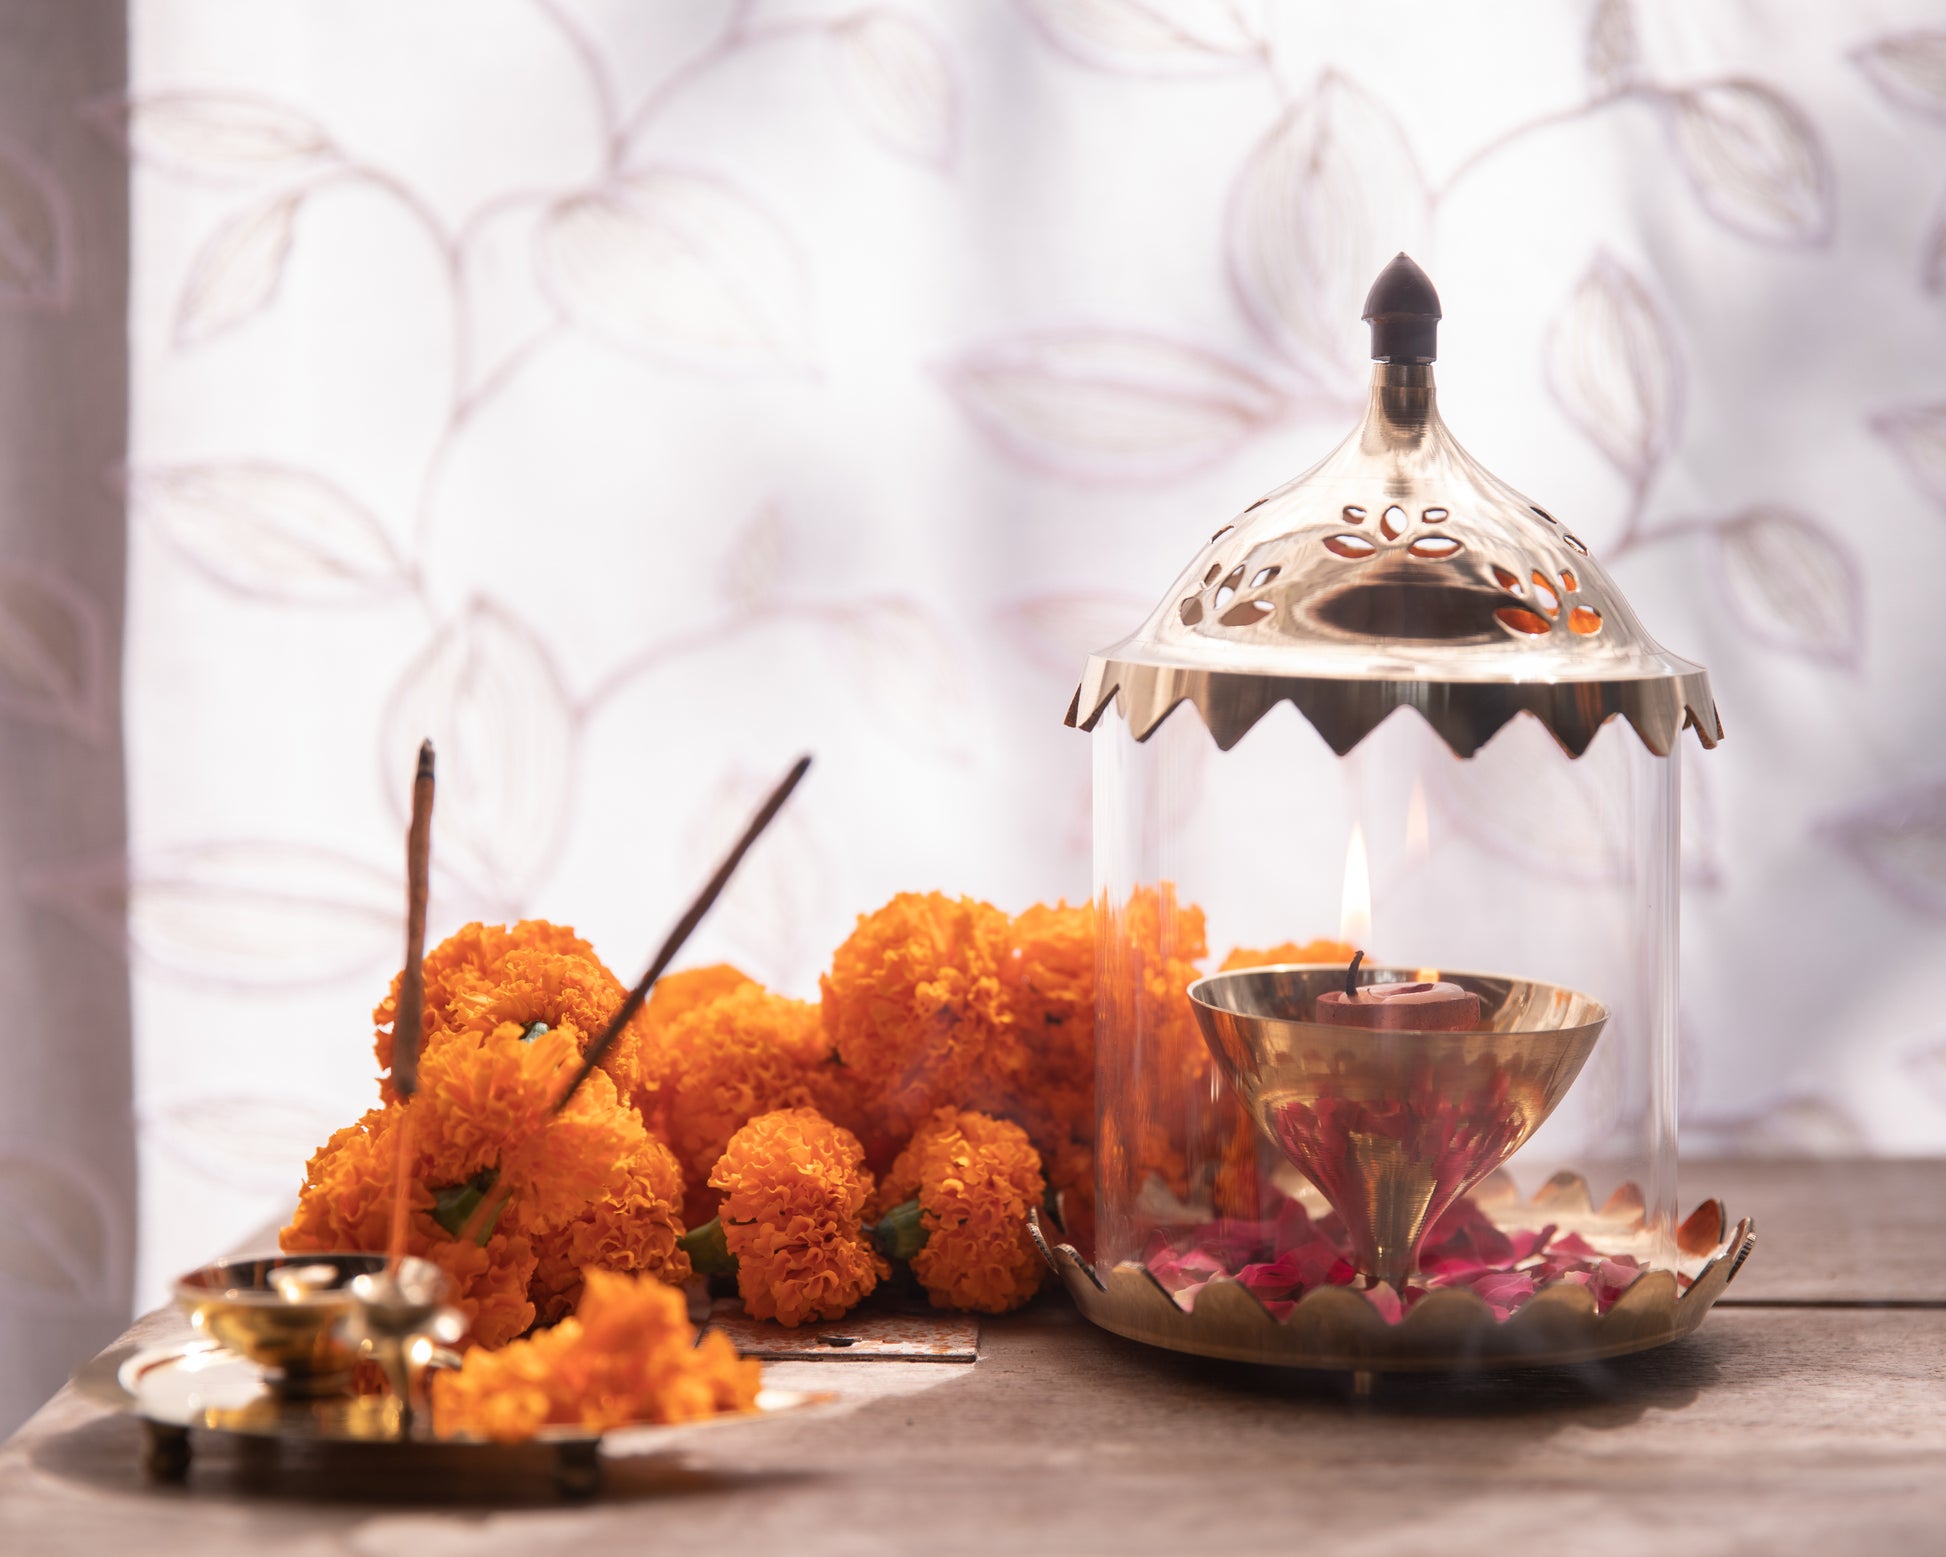 Our Glass Akhand Diya boasts a sleek and elegant design crafted from high-quality, transparent glass.